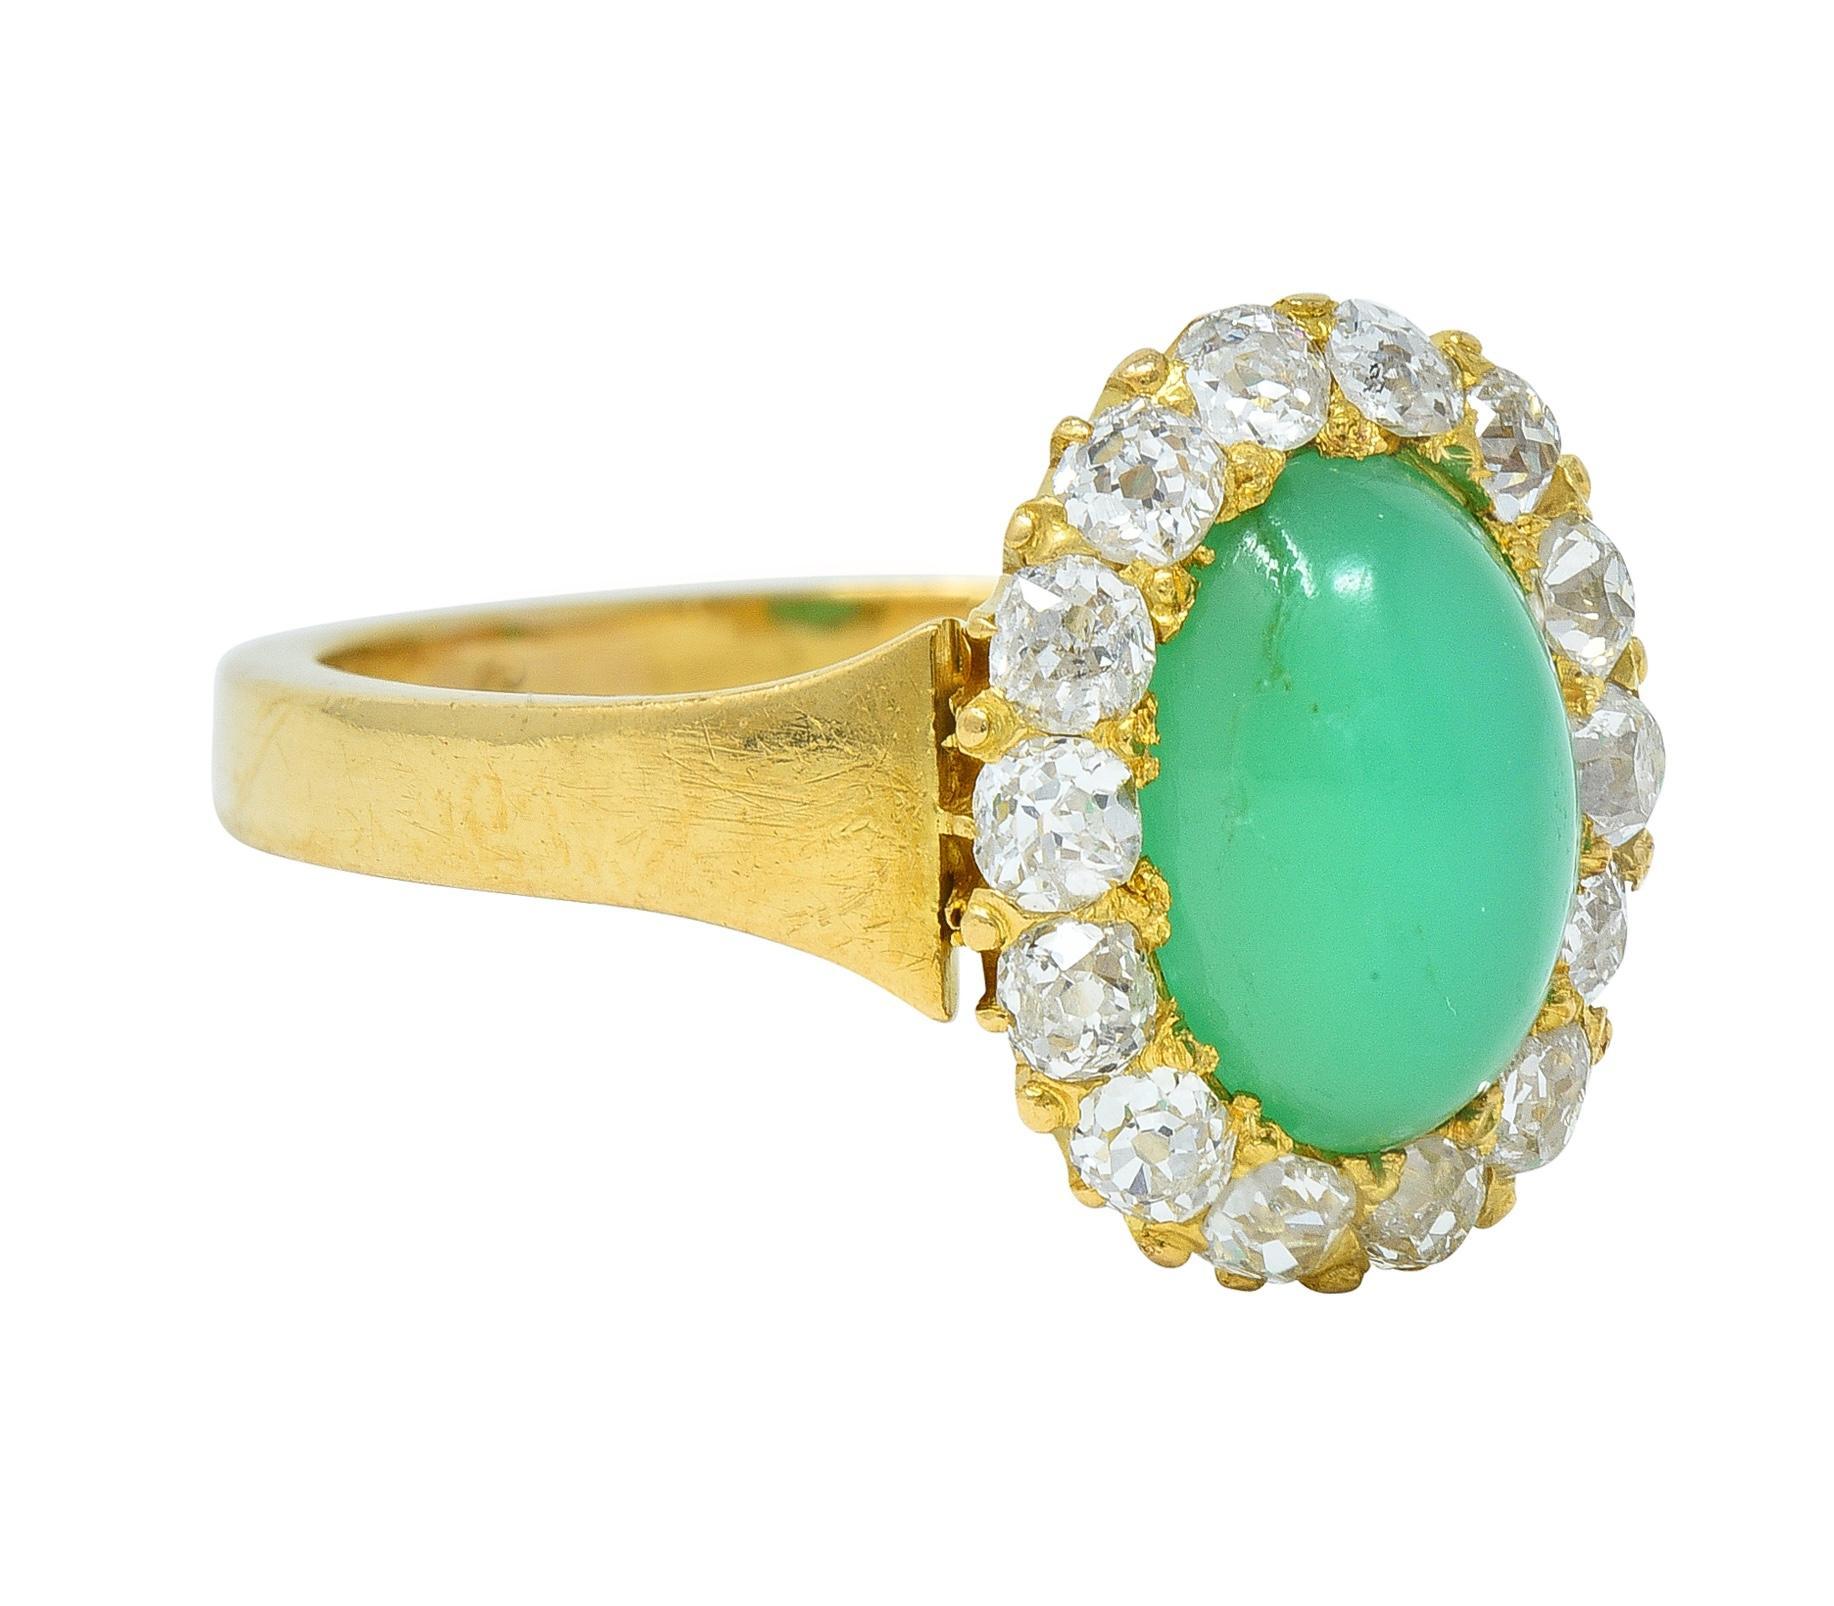 Centering an oval-shaped chrysoprase cabochon measuring 6.5 x 9.5 mm 
Translucent vibrant bluish green in color with subtle matrix 
Prong set with a halo surround of old mine cut diamonds 
Weighing approximately 0.42 carat total 
H to J color with